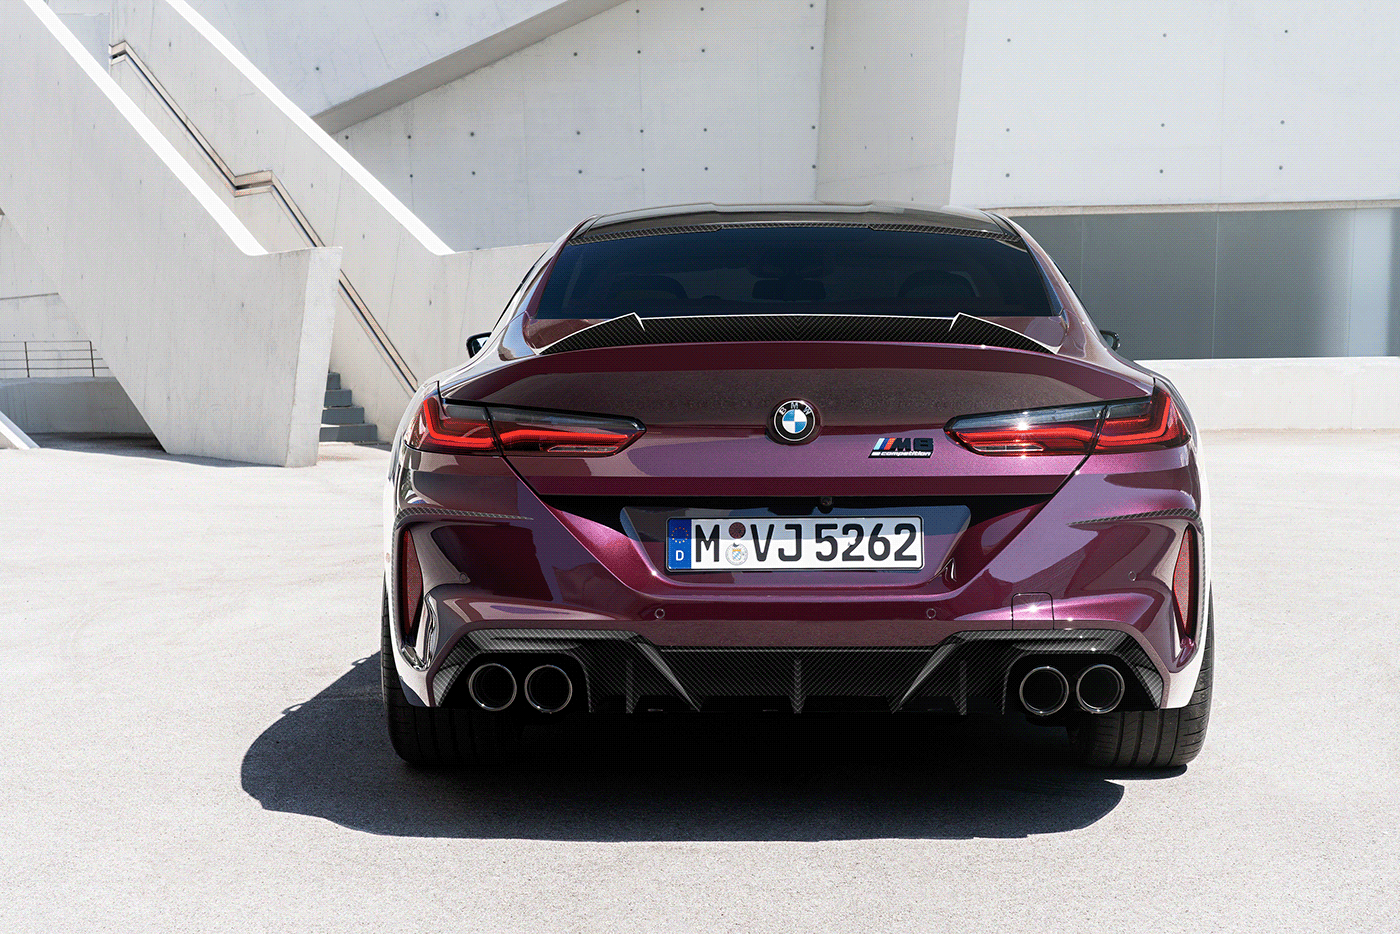 Tuning spoiler and diffuser for bmw m8